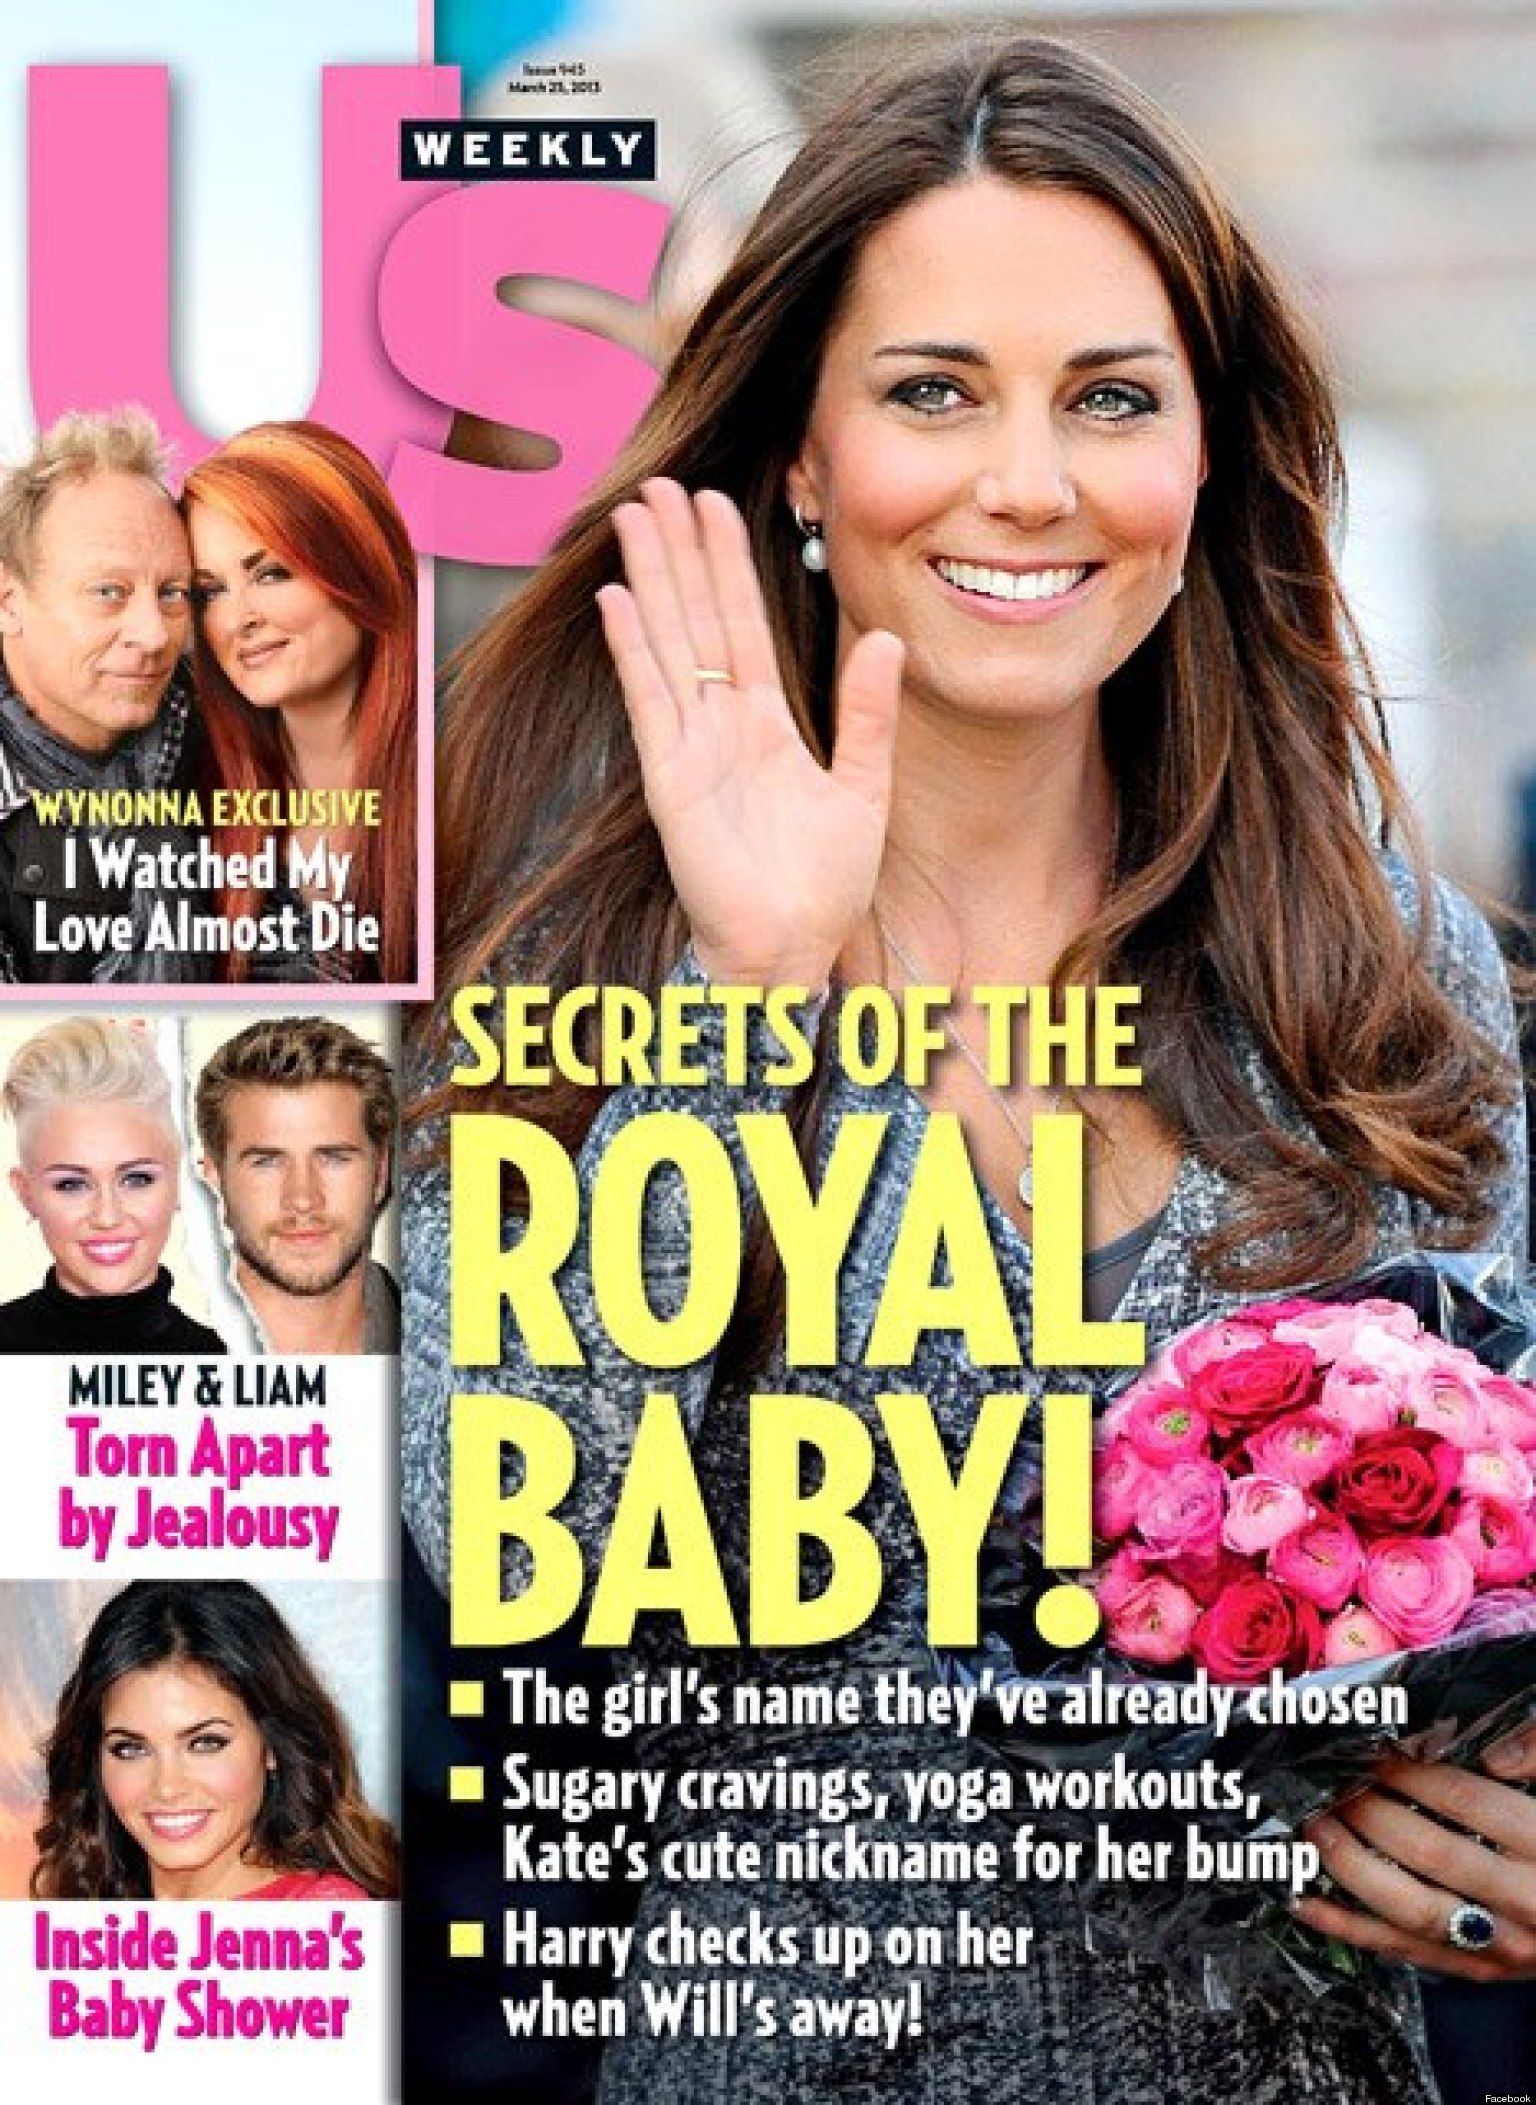 10 Most Common Words On Tabloid Covers | HuffPost